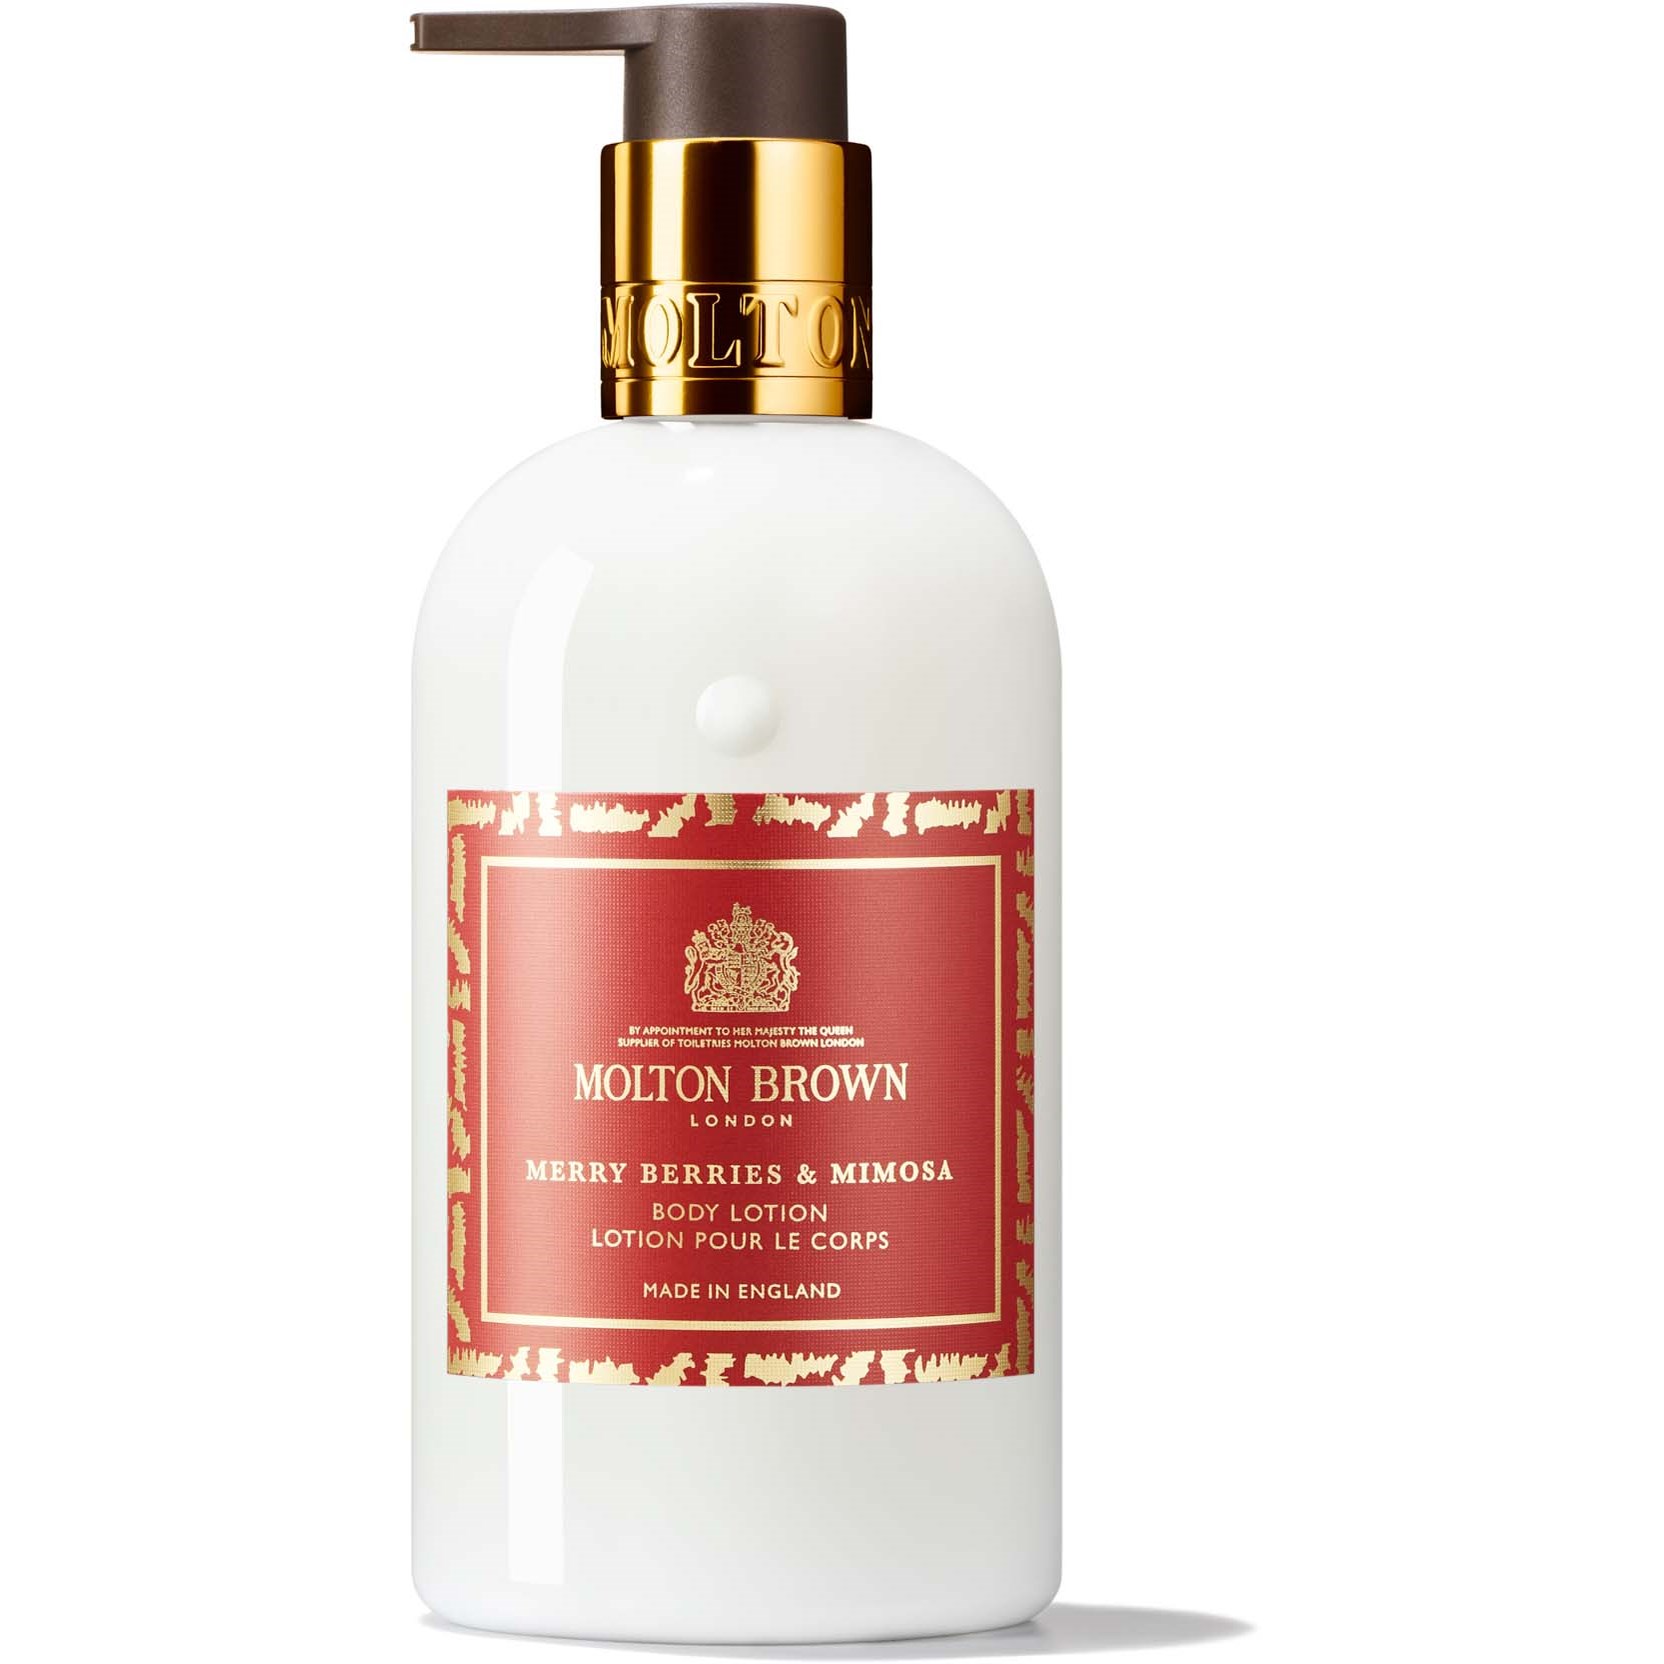 Molton Brown Merry Berries & Mimosa Body Lotion 300 ml